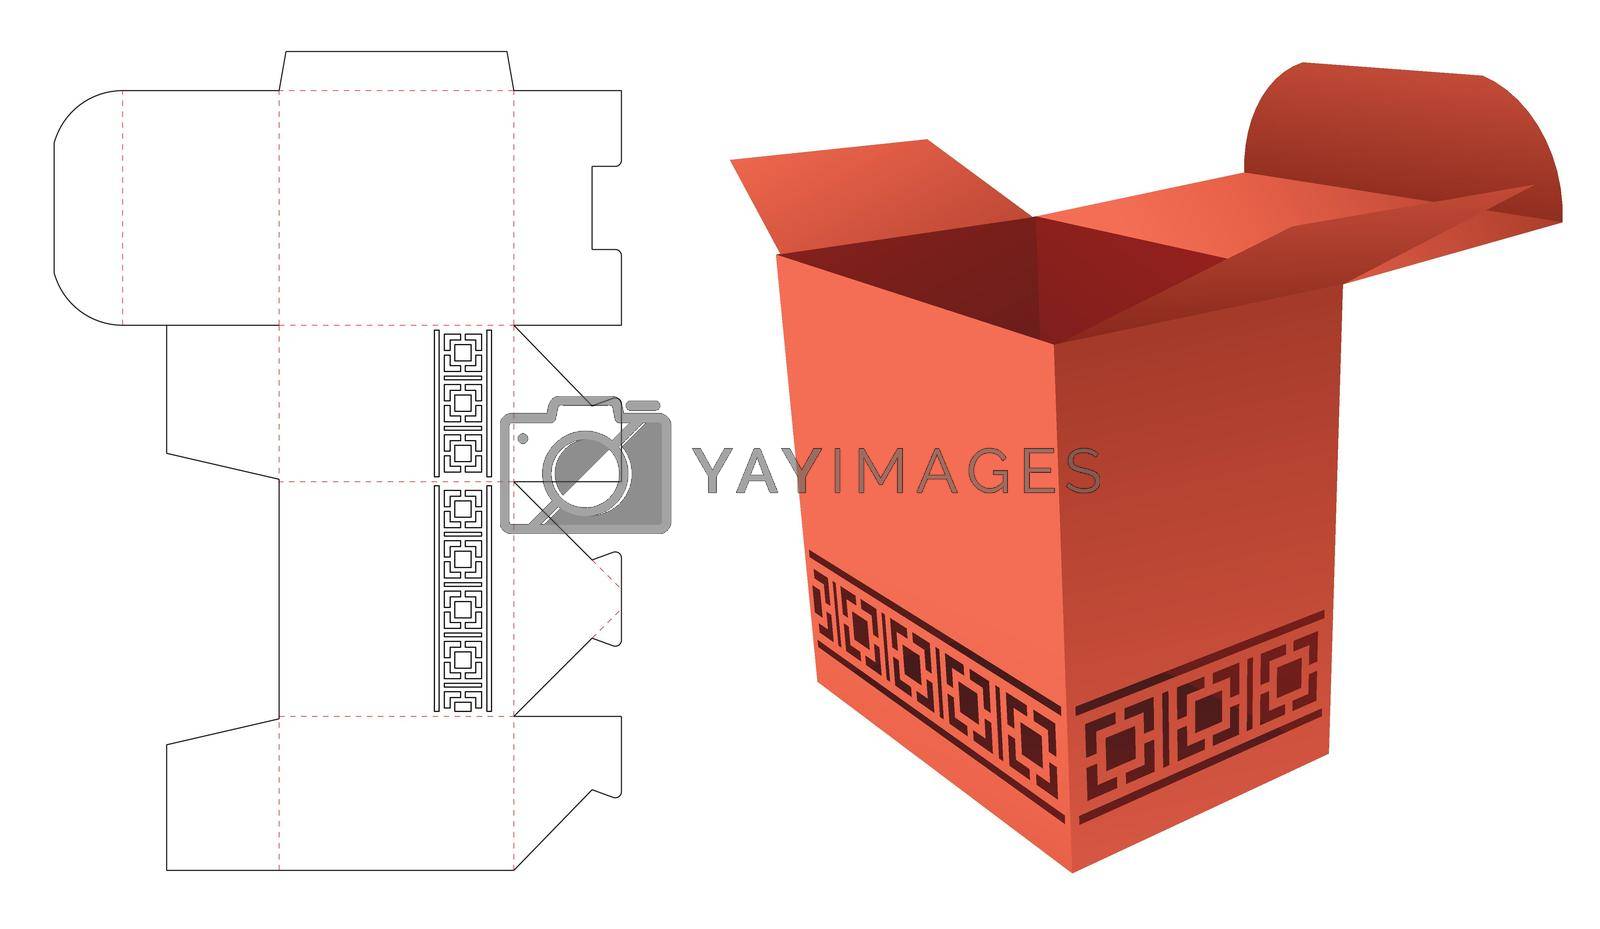 Royalty free image of Box with stenciled Chinese pattern die cut template by valueinvestor